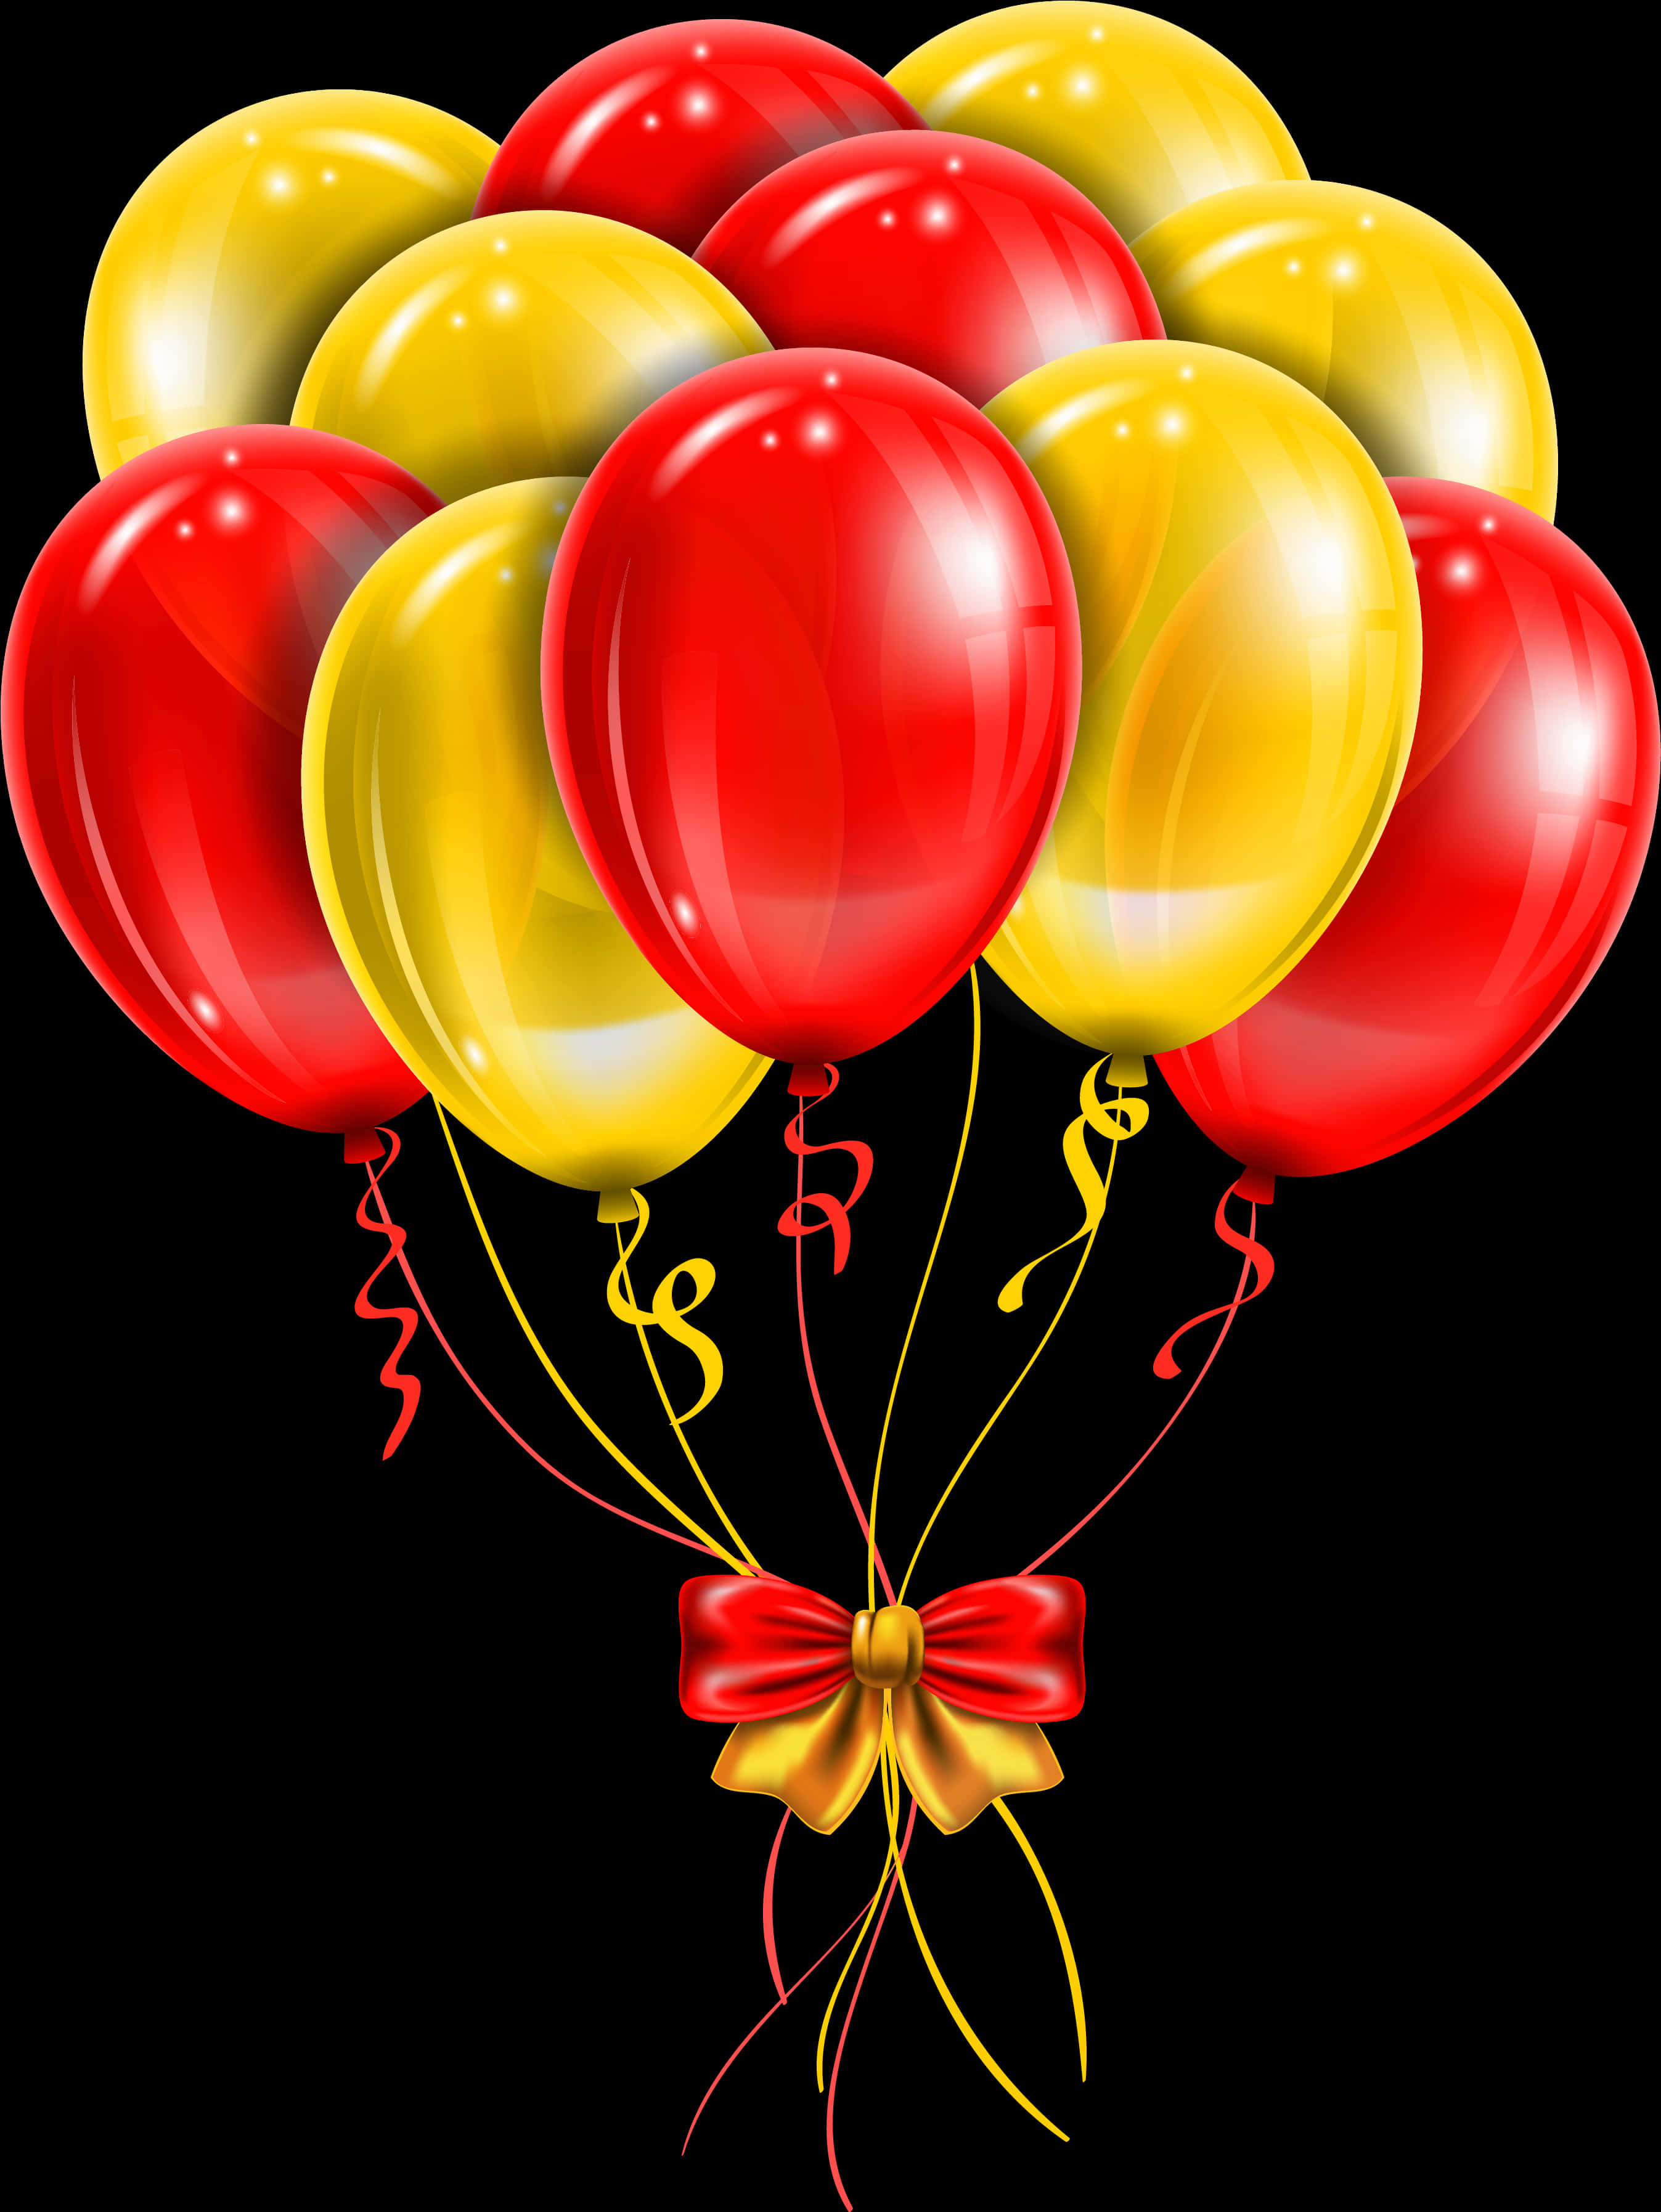 Download Festive Redand Yellow Balloons Bunch | Wallpapers.com